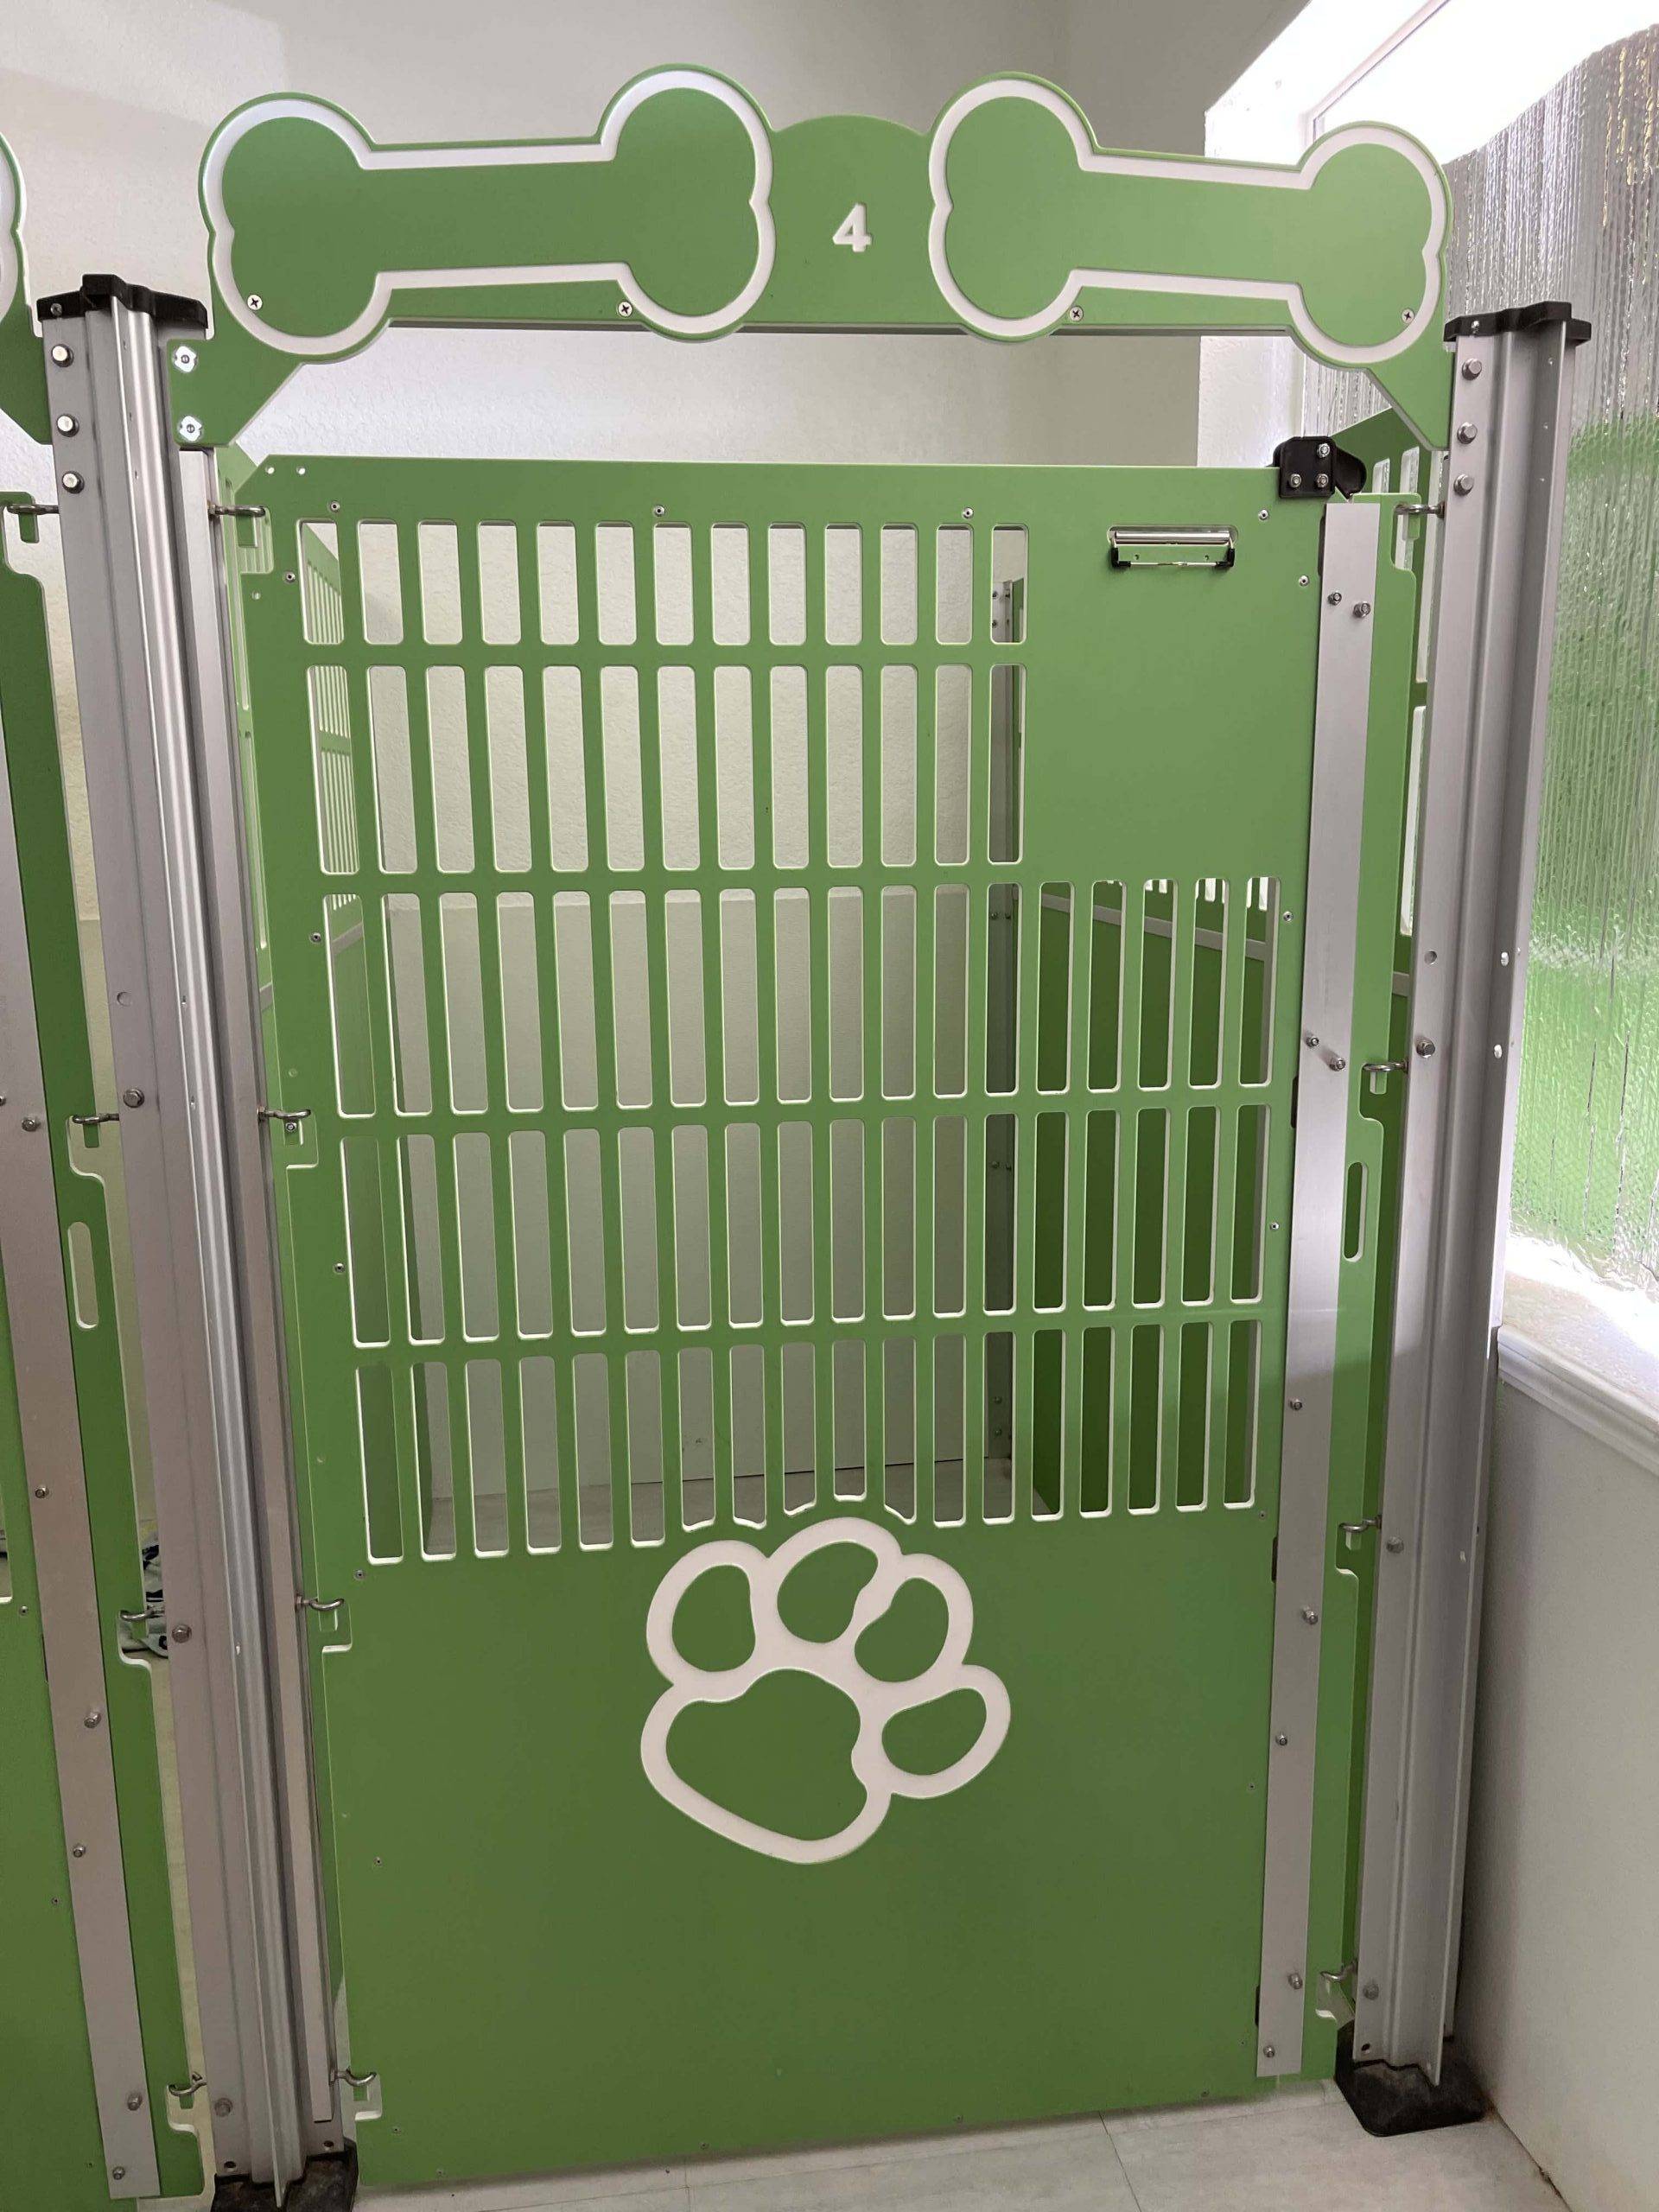 A premium pet services green dog kennel with paw prints on it.